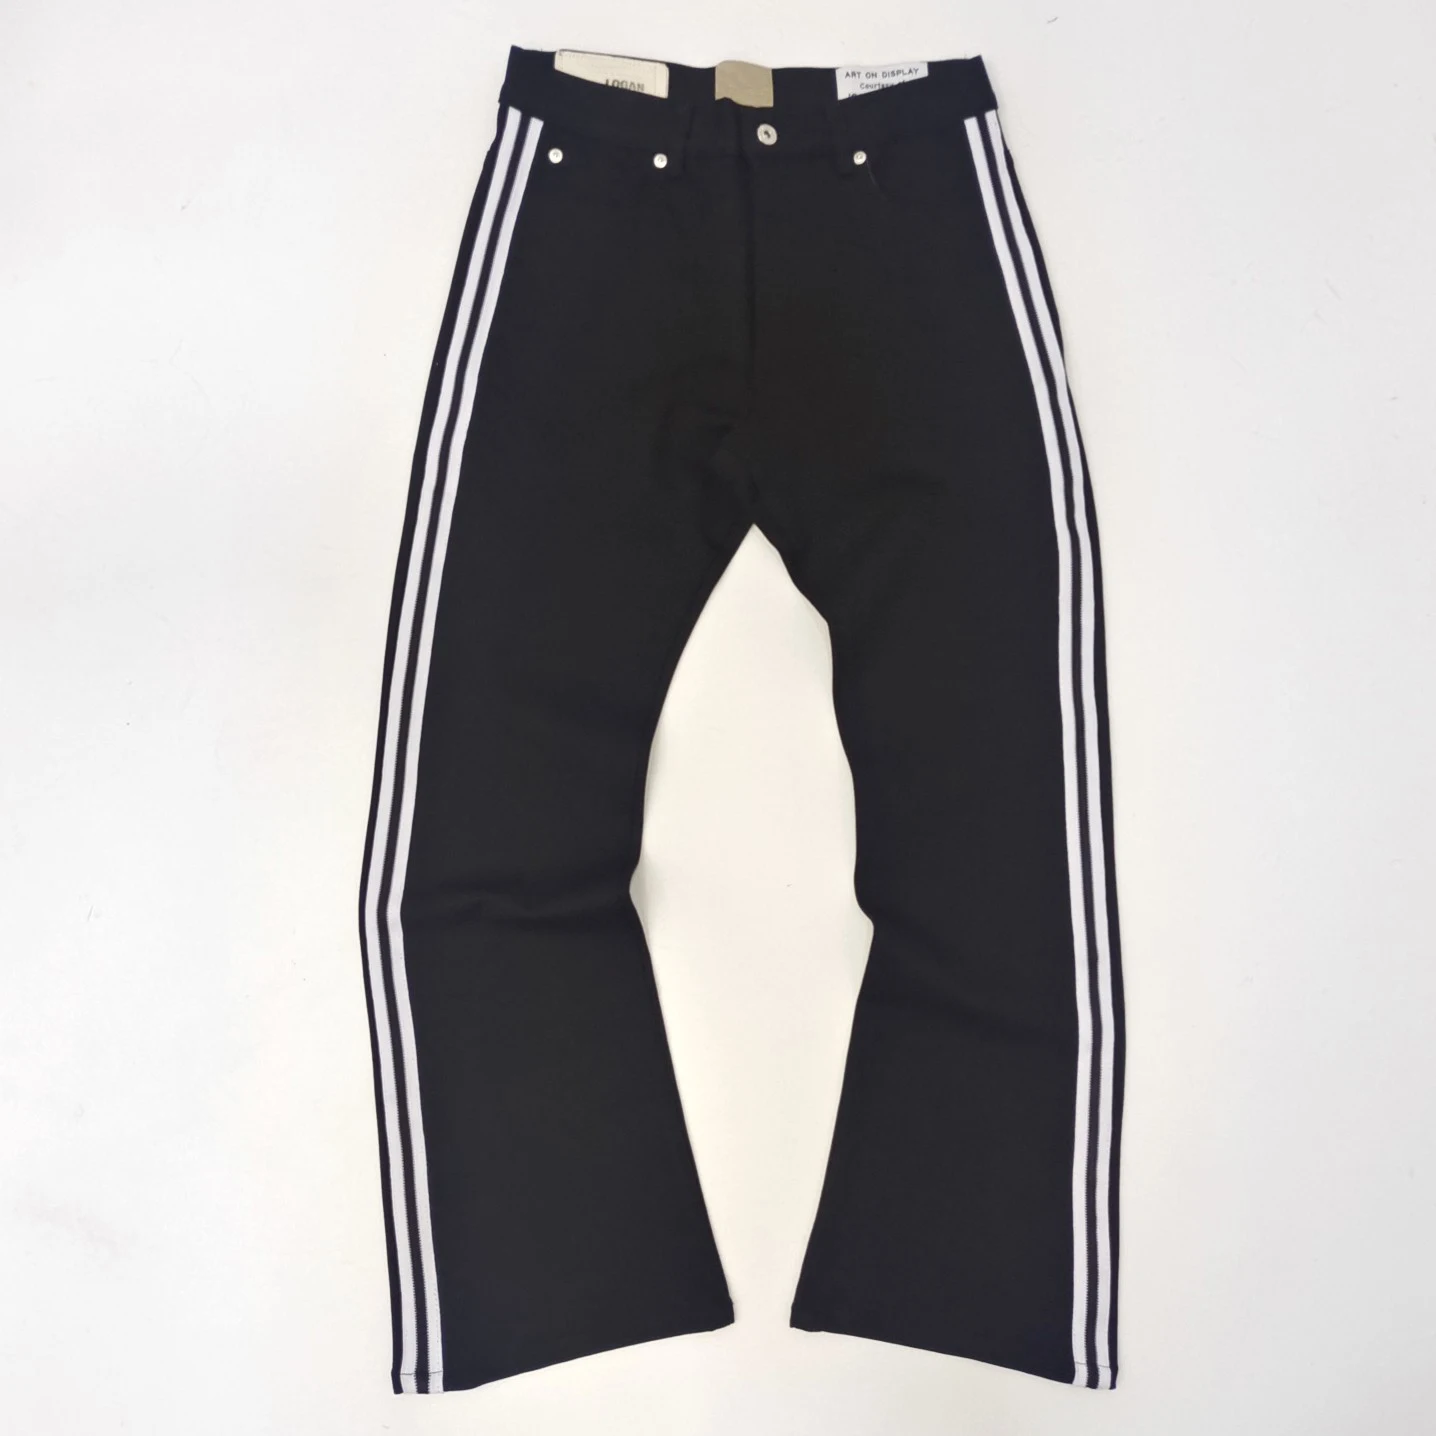 DG Black and White Webbing Micro Flared Pants Top Quality Casual Pants Men's and Women's Couple Pants